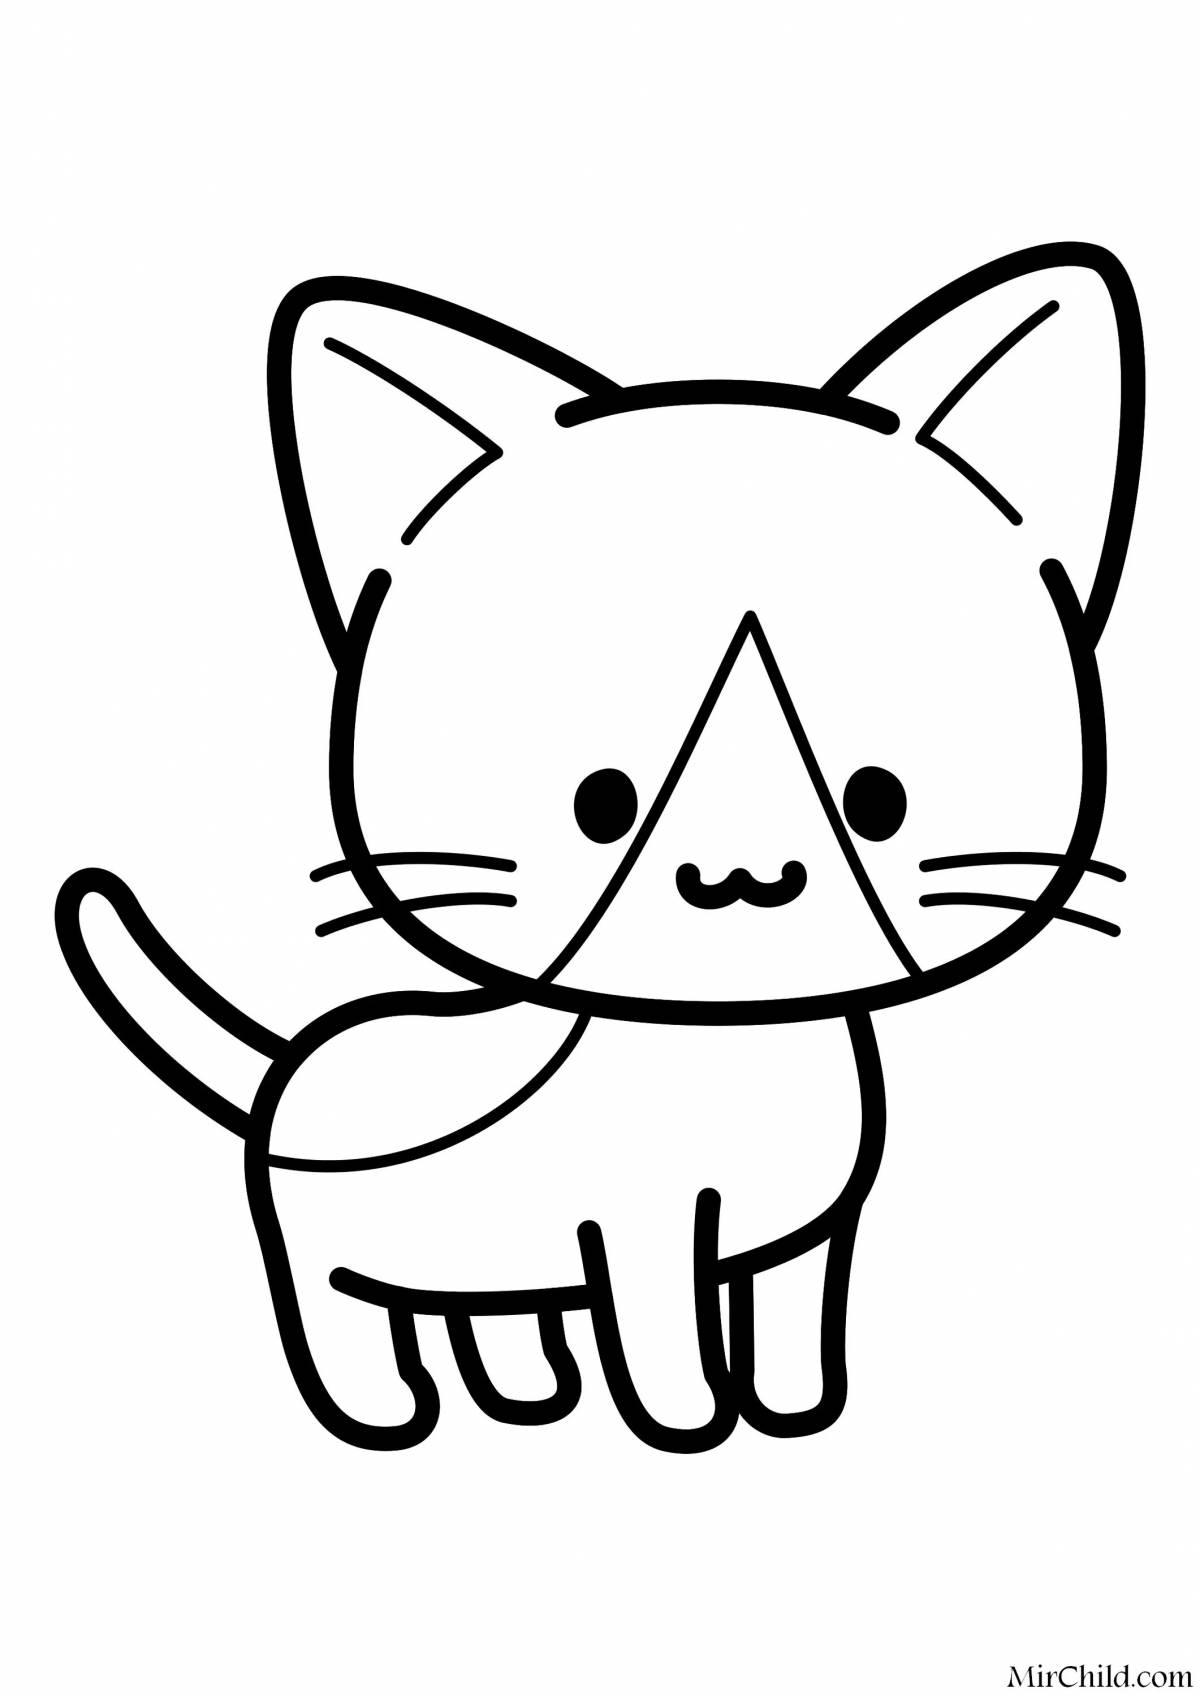 Bright and cheerful cat coloring book for children